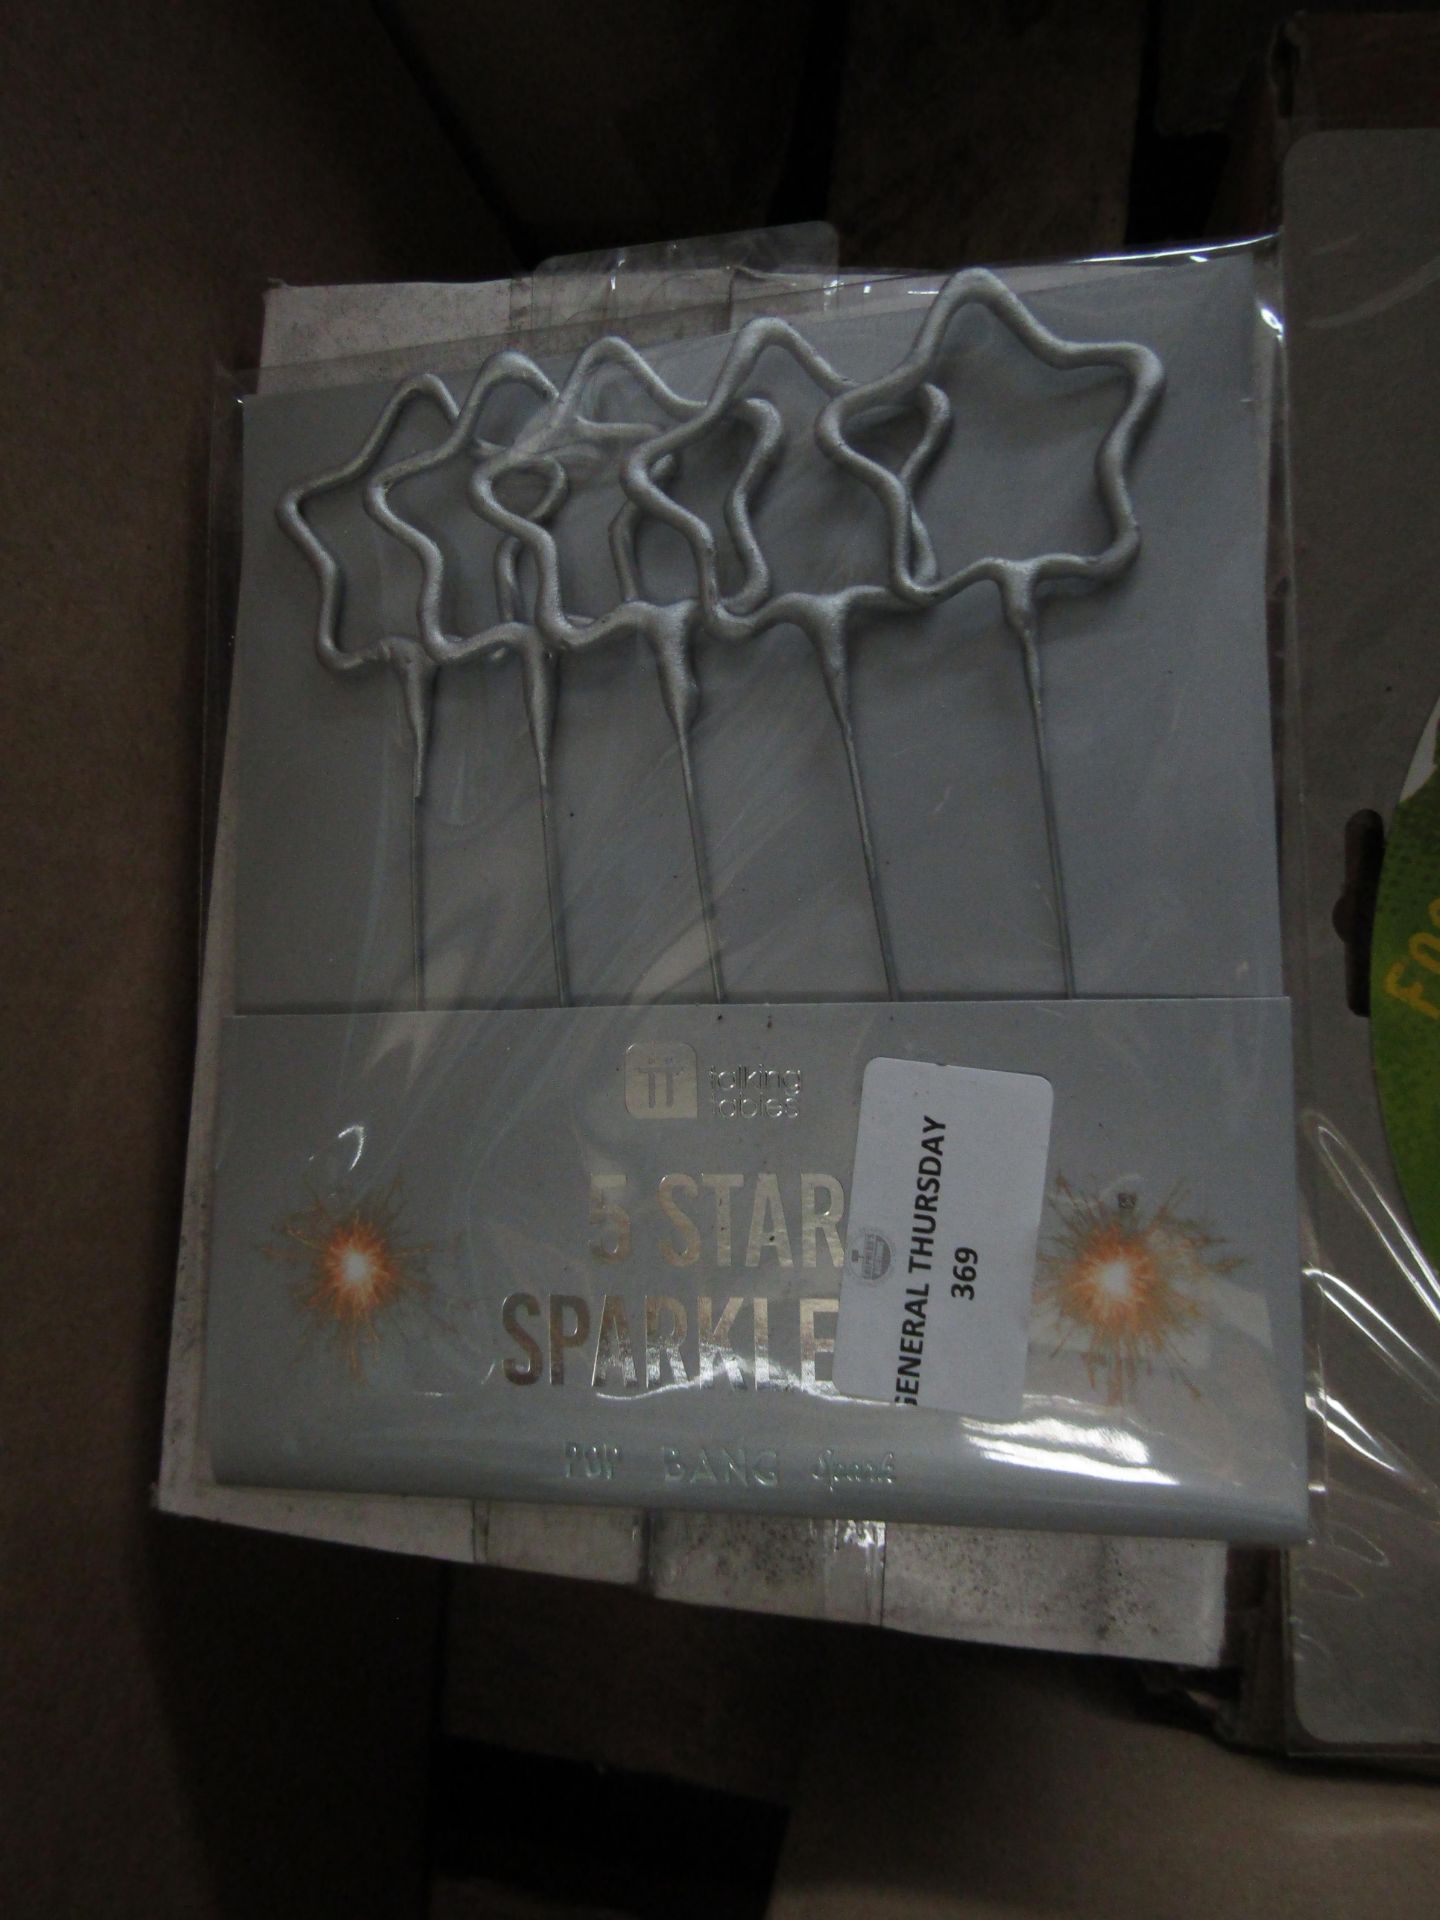 Box of approx 20 sets of 5 Star cake sparklers, unused